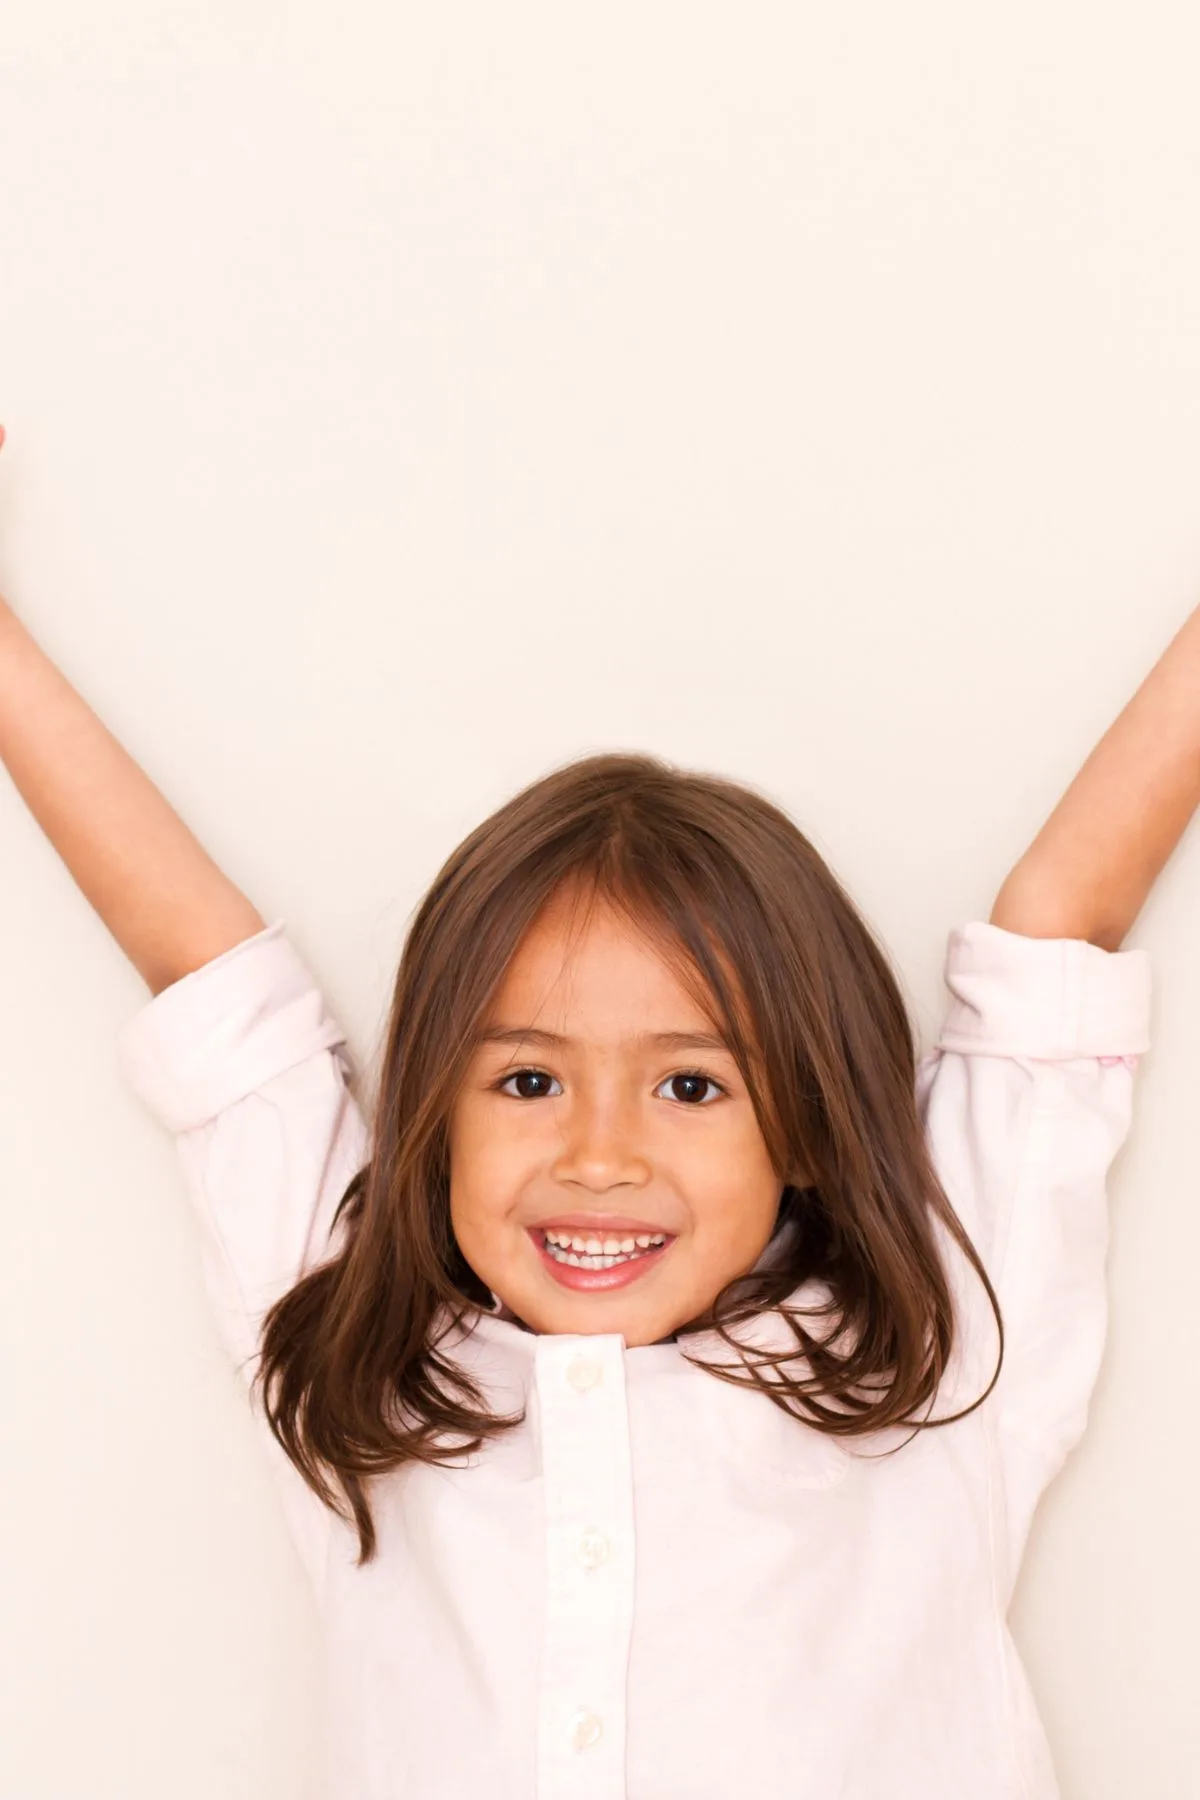 A girl stands in front of a cream background with arms raised in excitement.